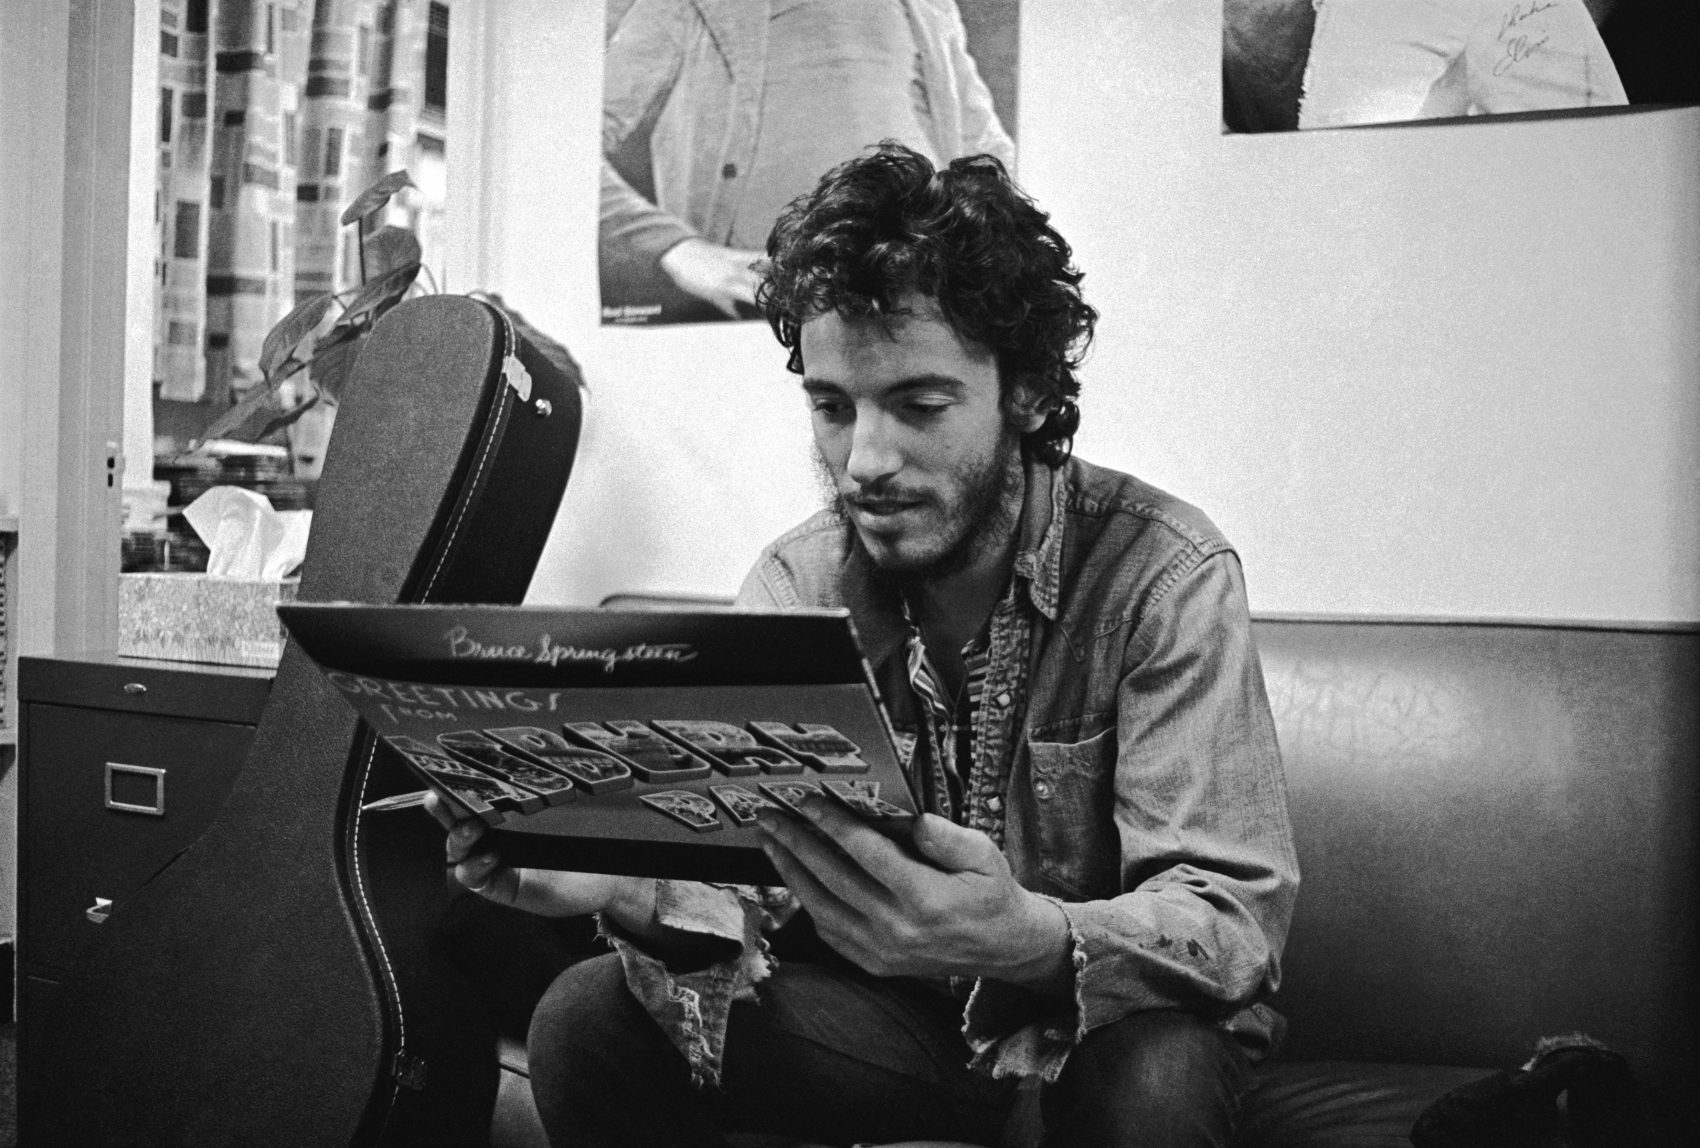 Bruce Springsteen looking at his first album for the first time. (Courtesy Art Maillet)